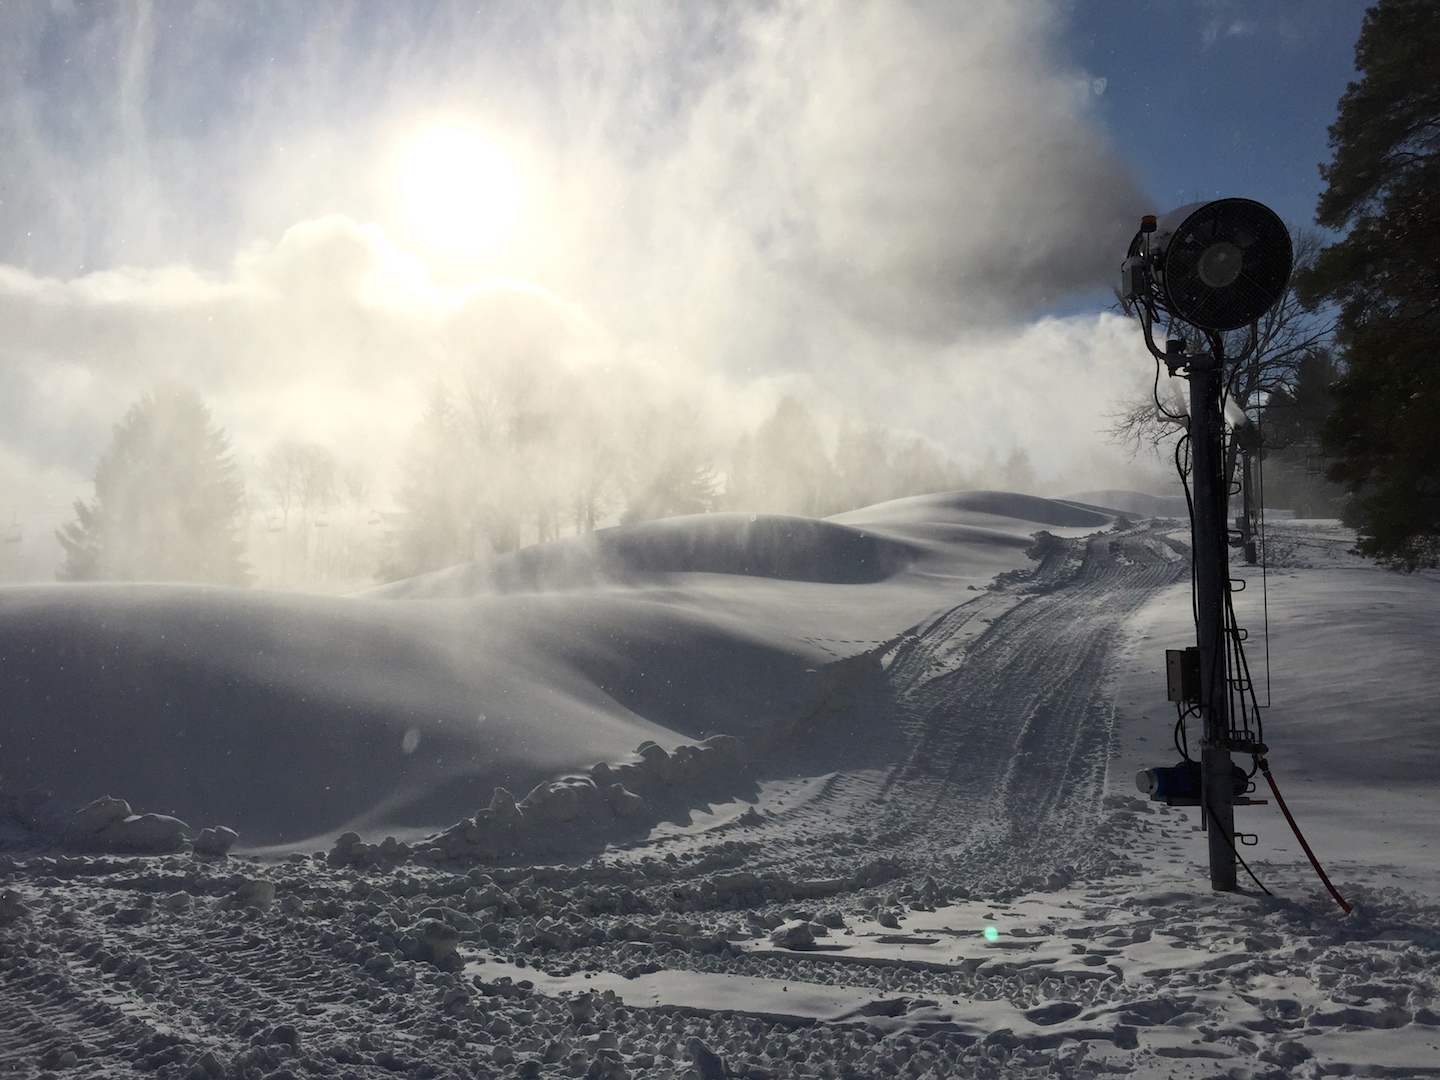 Early Season Snowmaking in November at Snow Trails